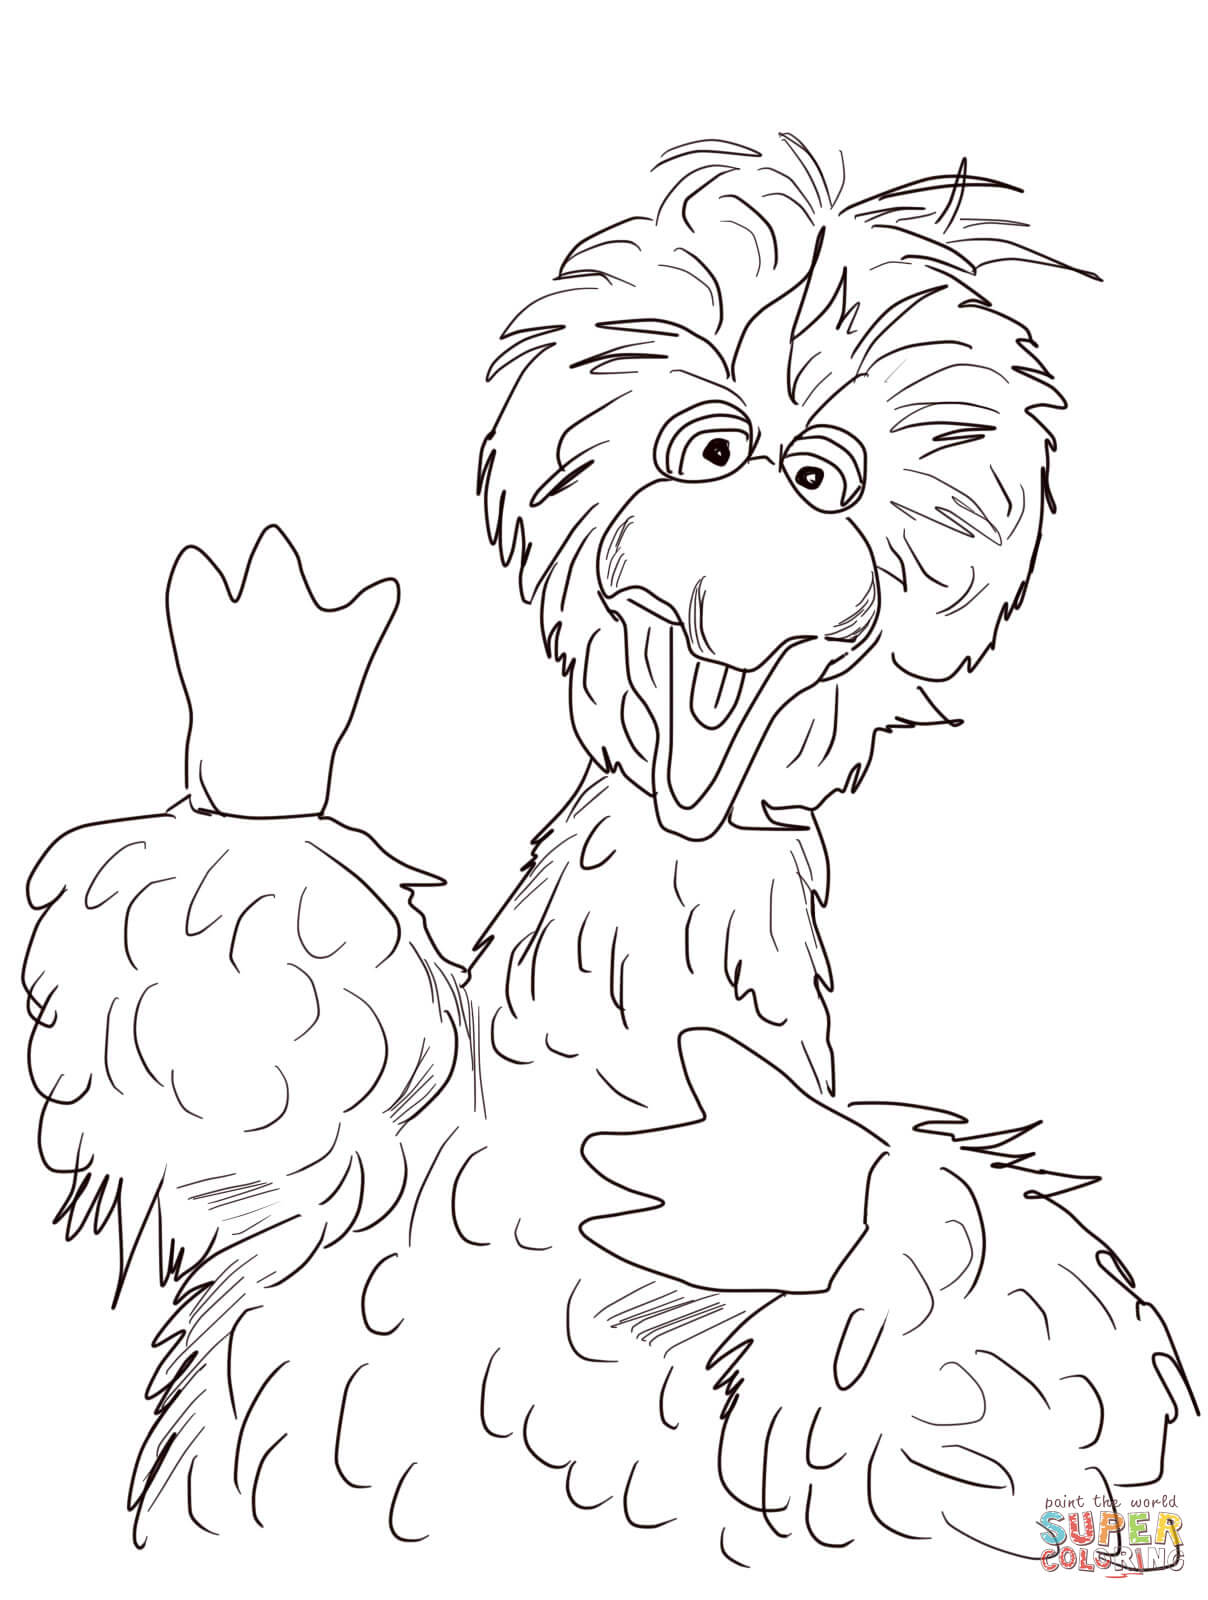 Sesame street big bird coloring page free printable coloring pages